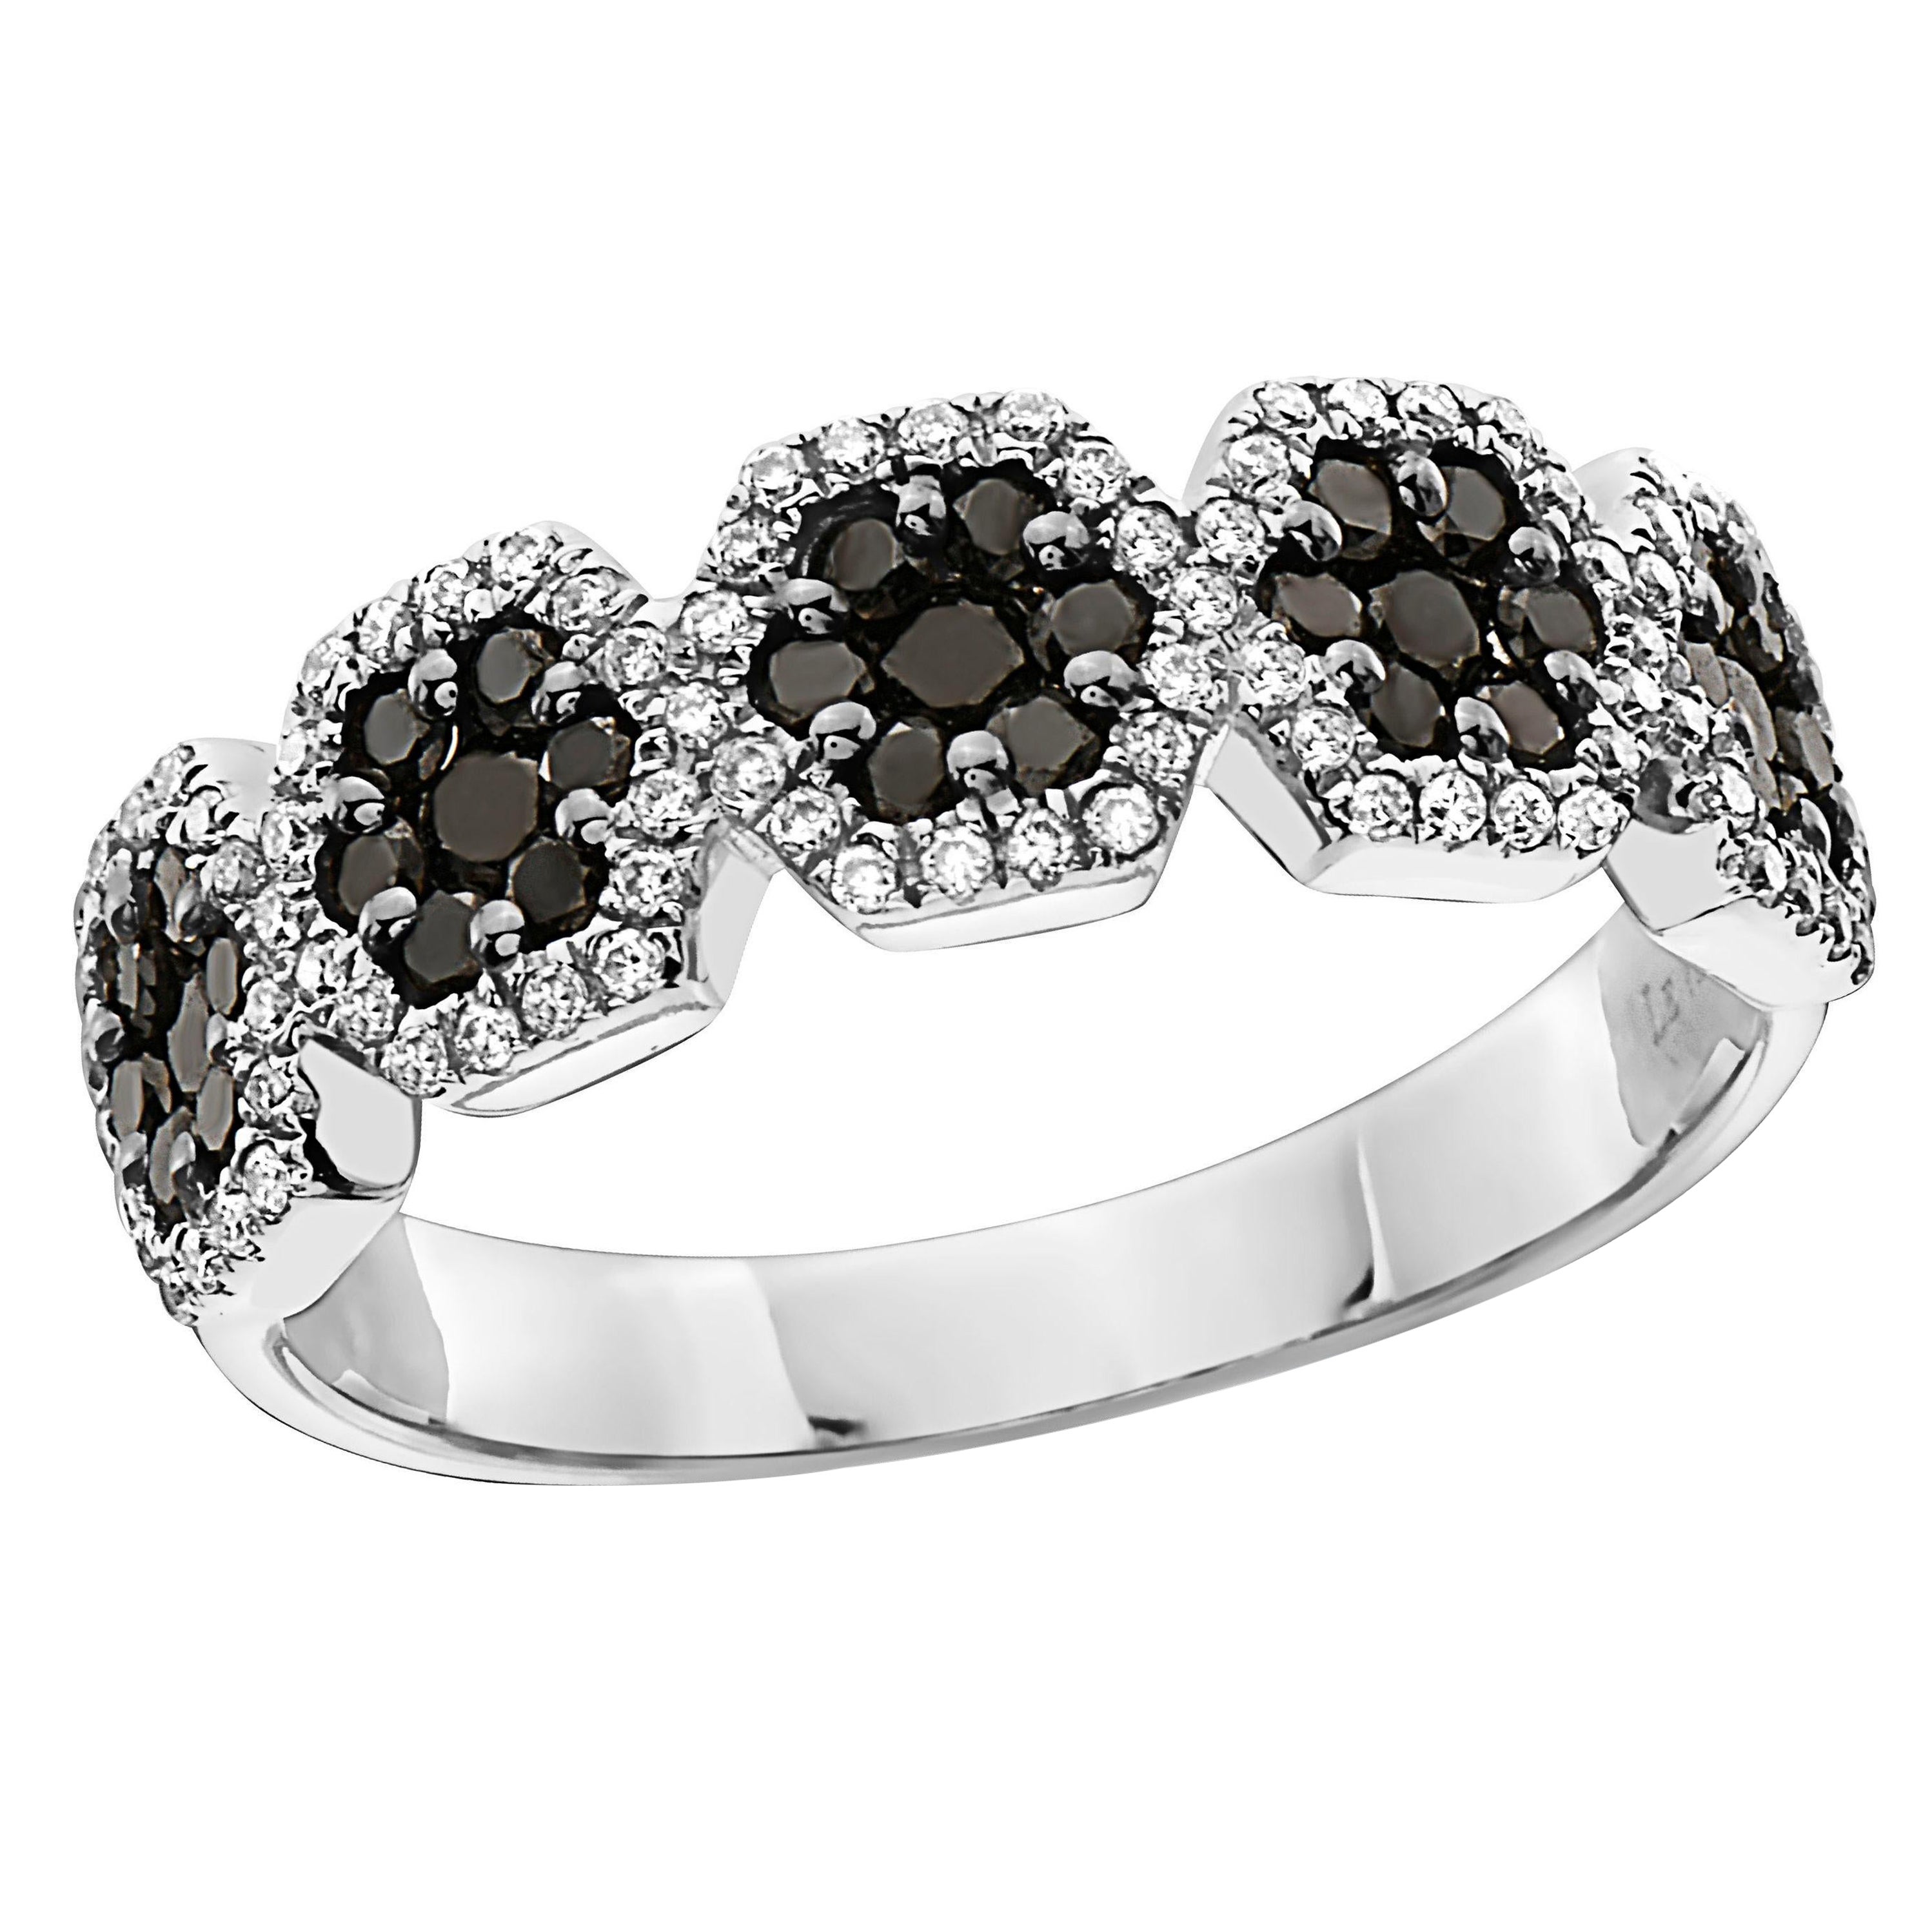 LeVian Ring 3/4 Cts Black and White I S12 Natural Diamonds Set in 14K White Gold